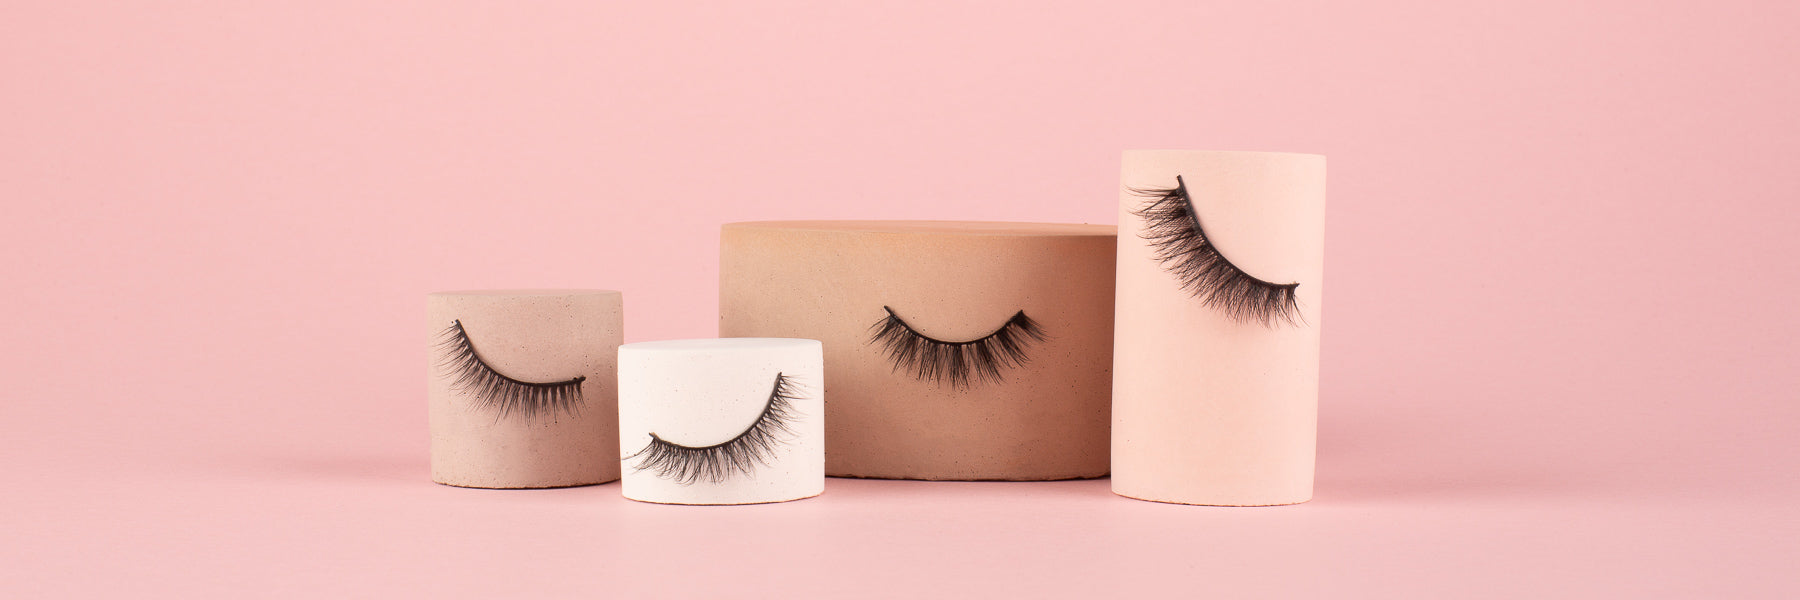 wing it luxury vegan silk system lashes on props